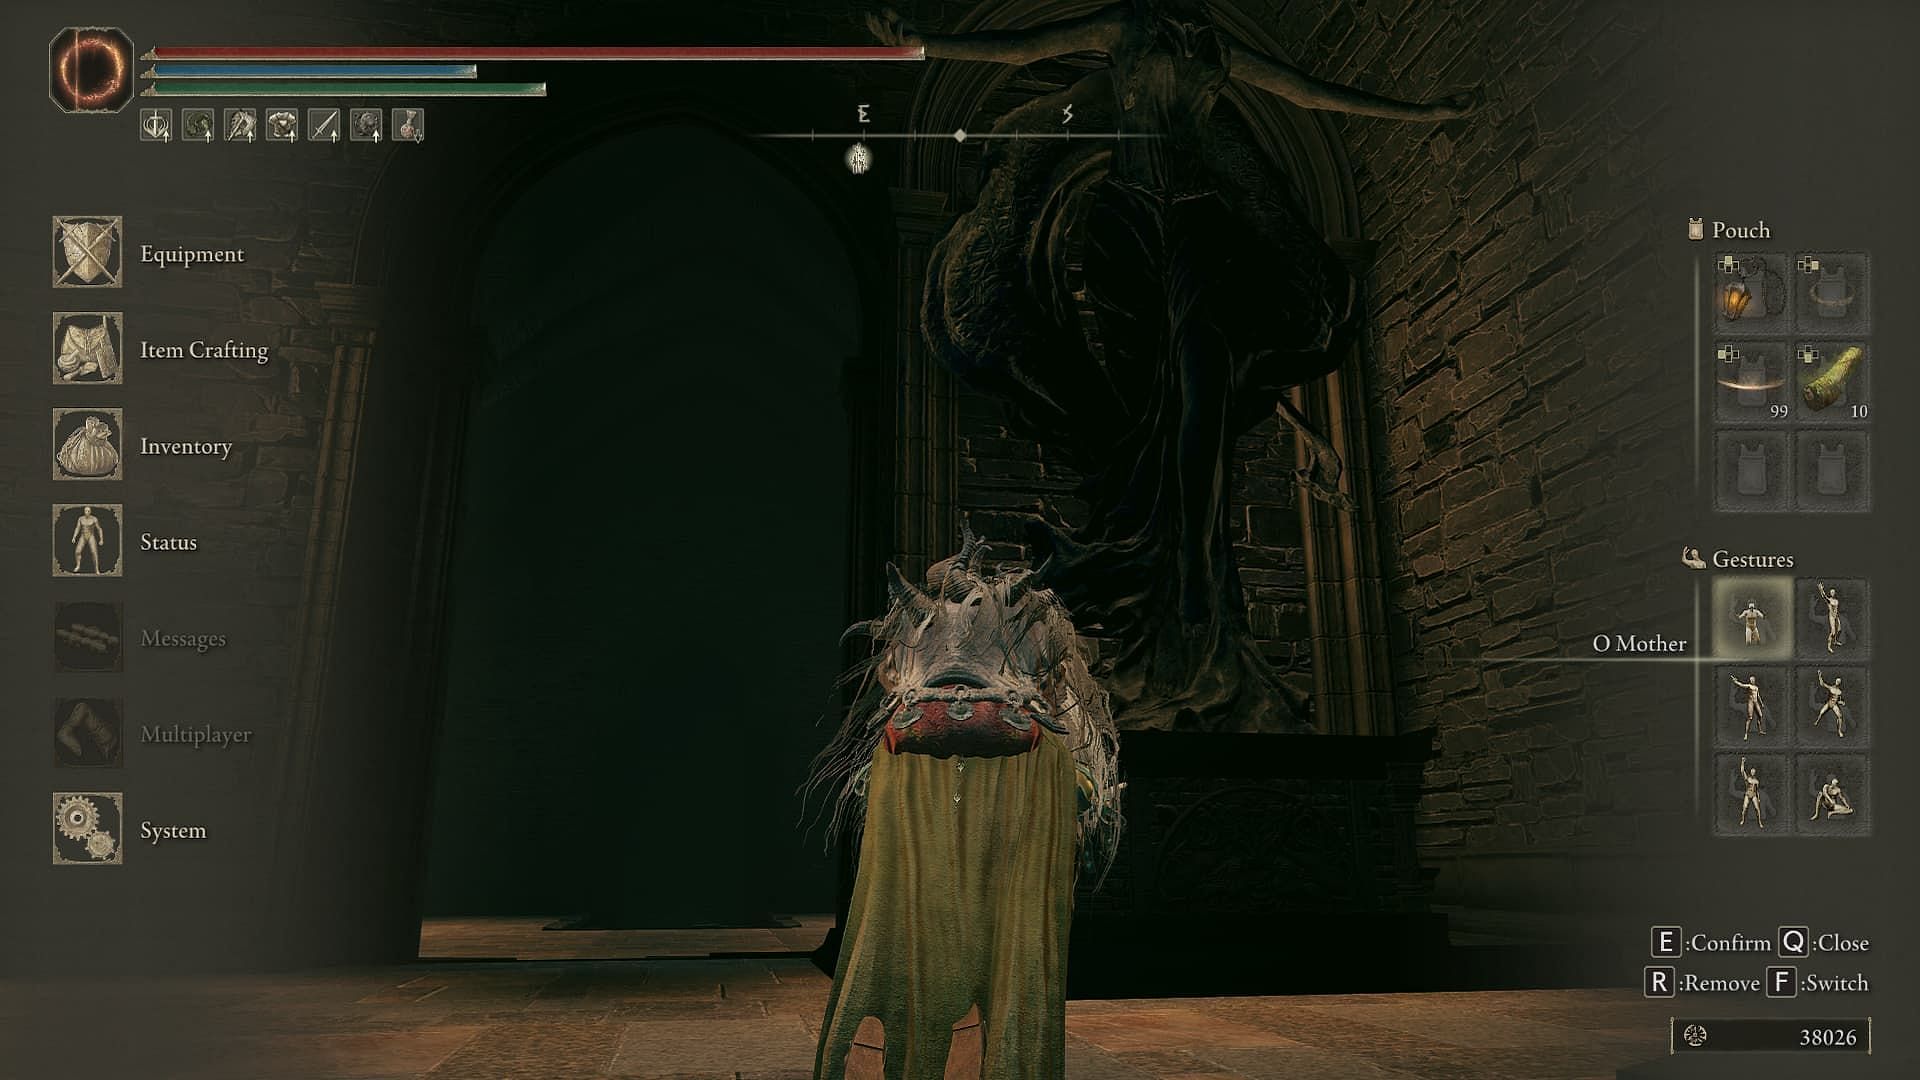 Using the O Mother gesture to open the door to the Scaduview region (Image via FromSoftware)